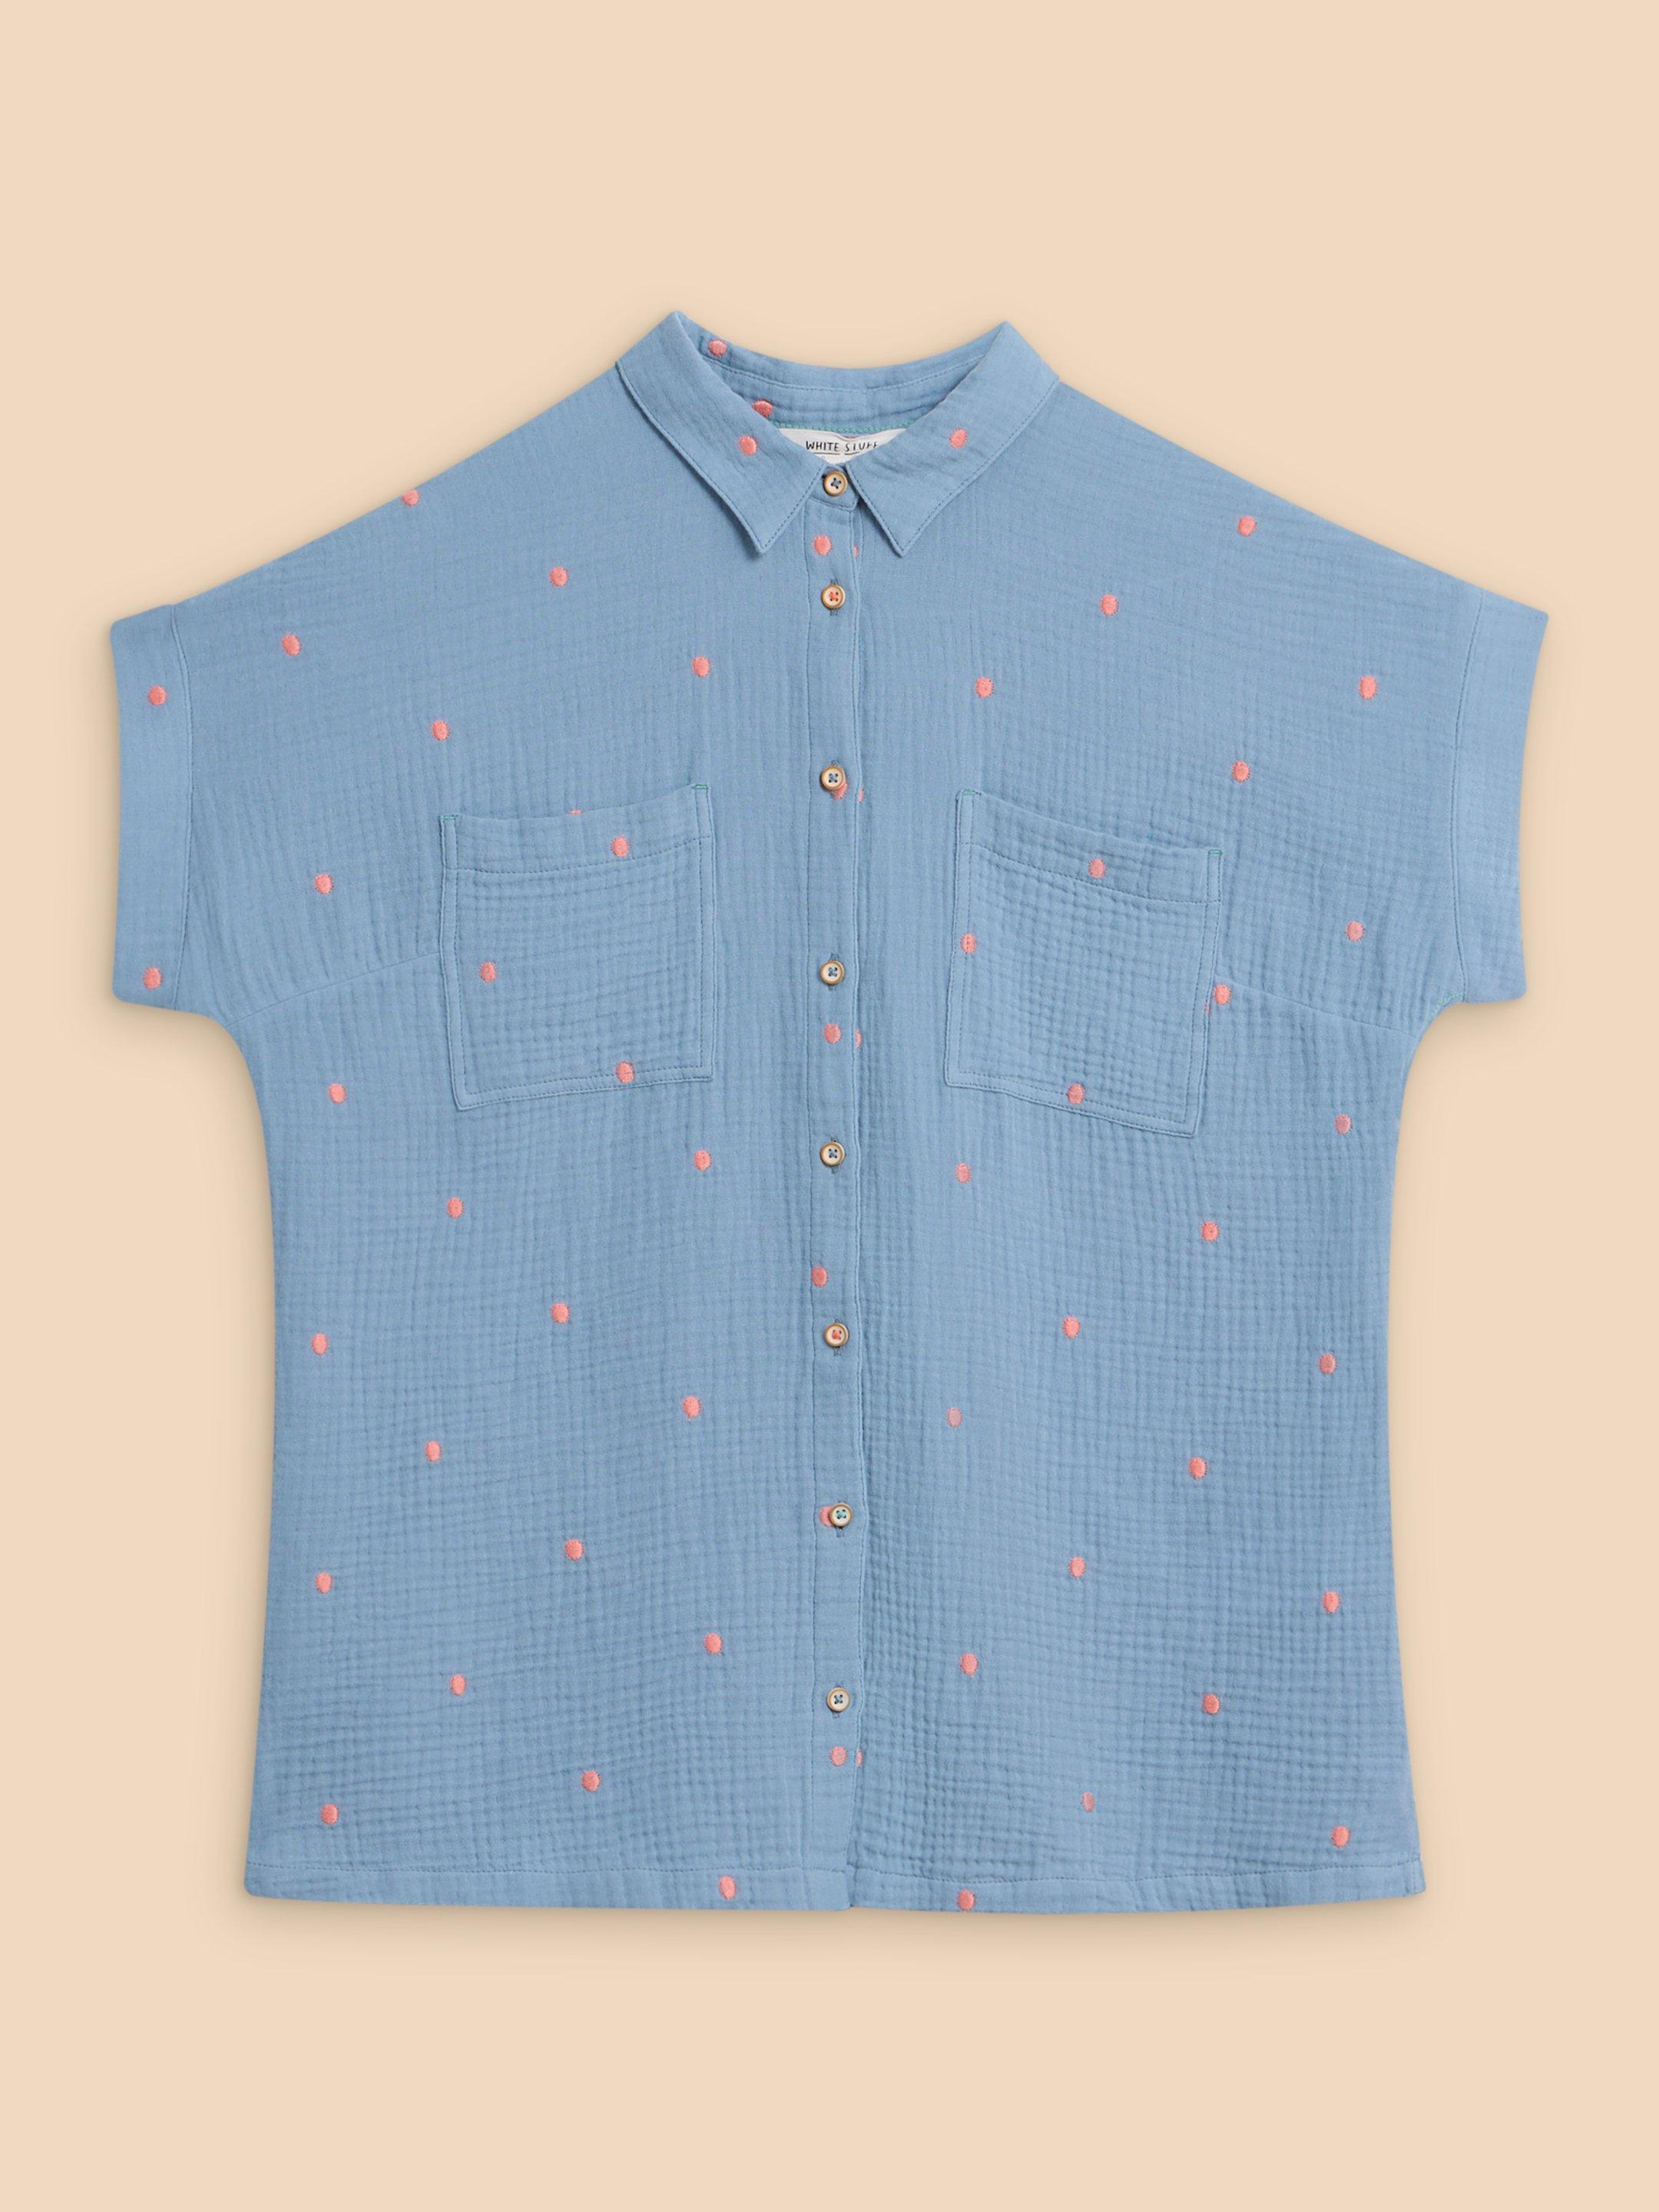 Emma Double Cloth Shirt in BLUE MLT - FLAT FRONT